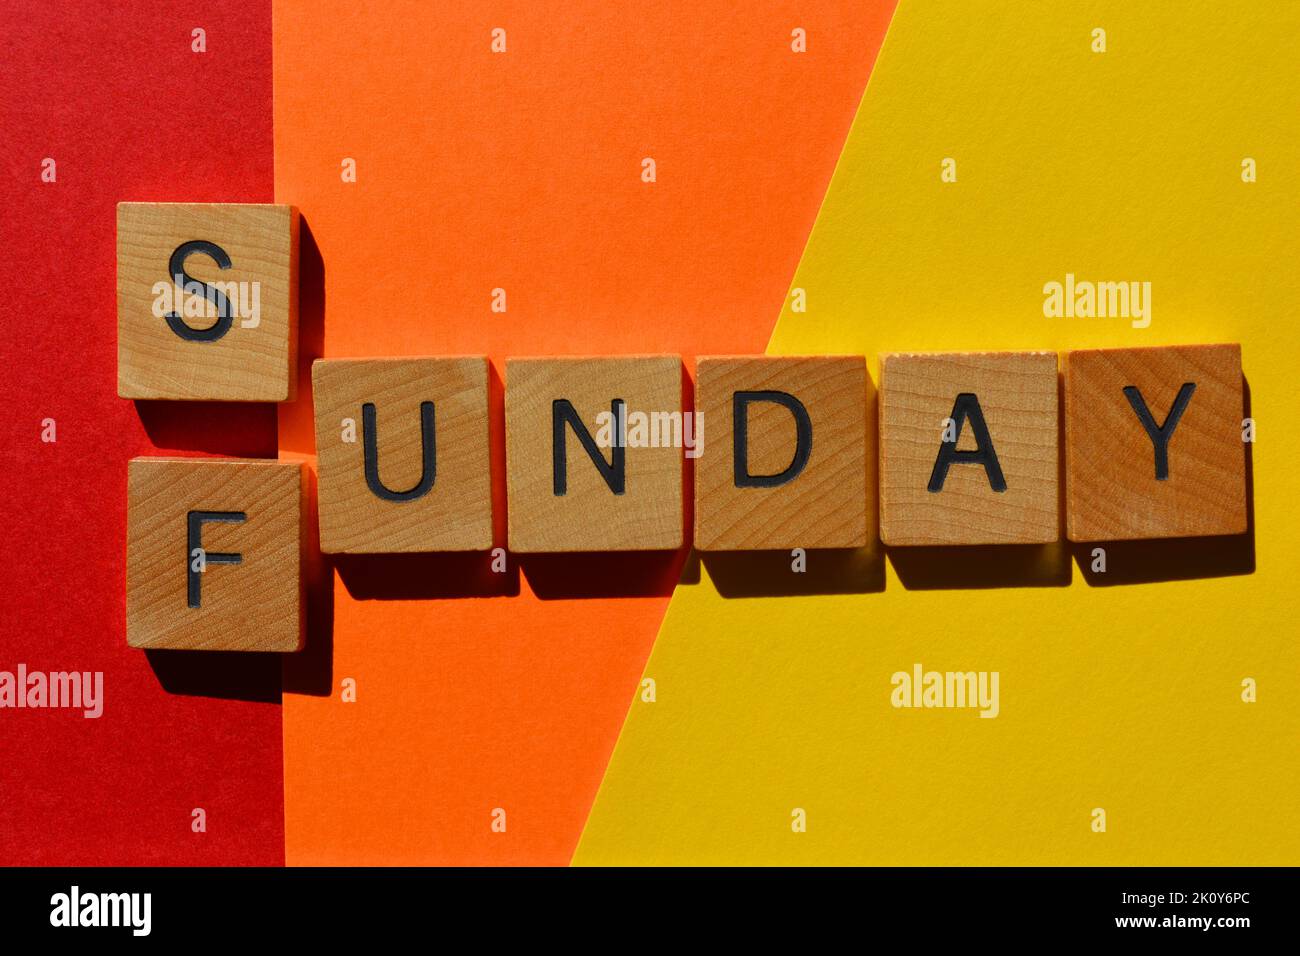 Sunday, Funday, words in wooden alphabet letters isolated on bright and colourful background Stock Photo